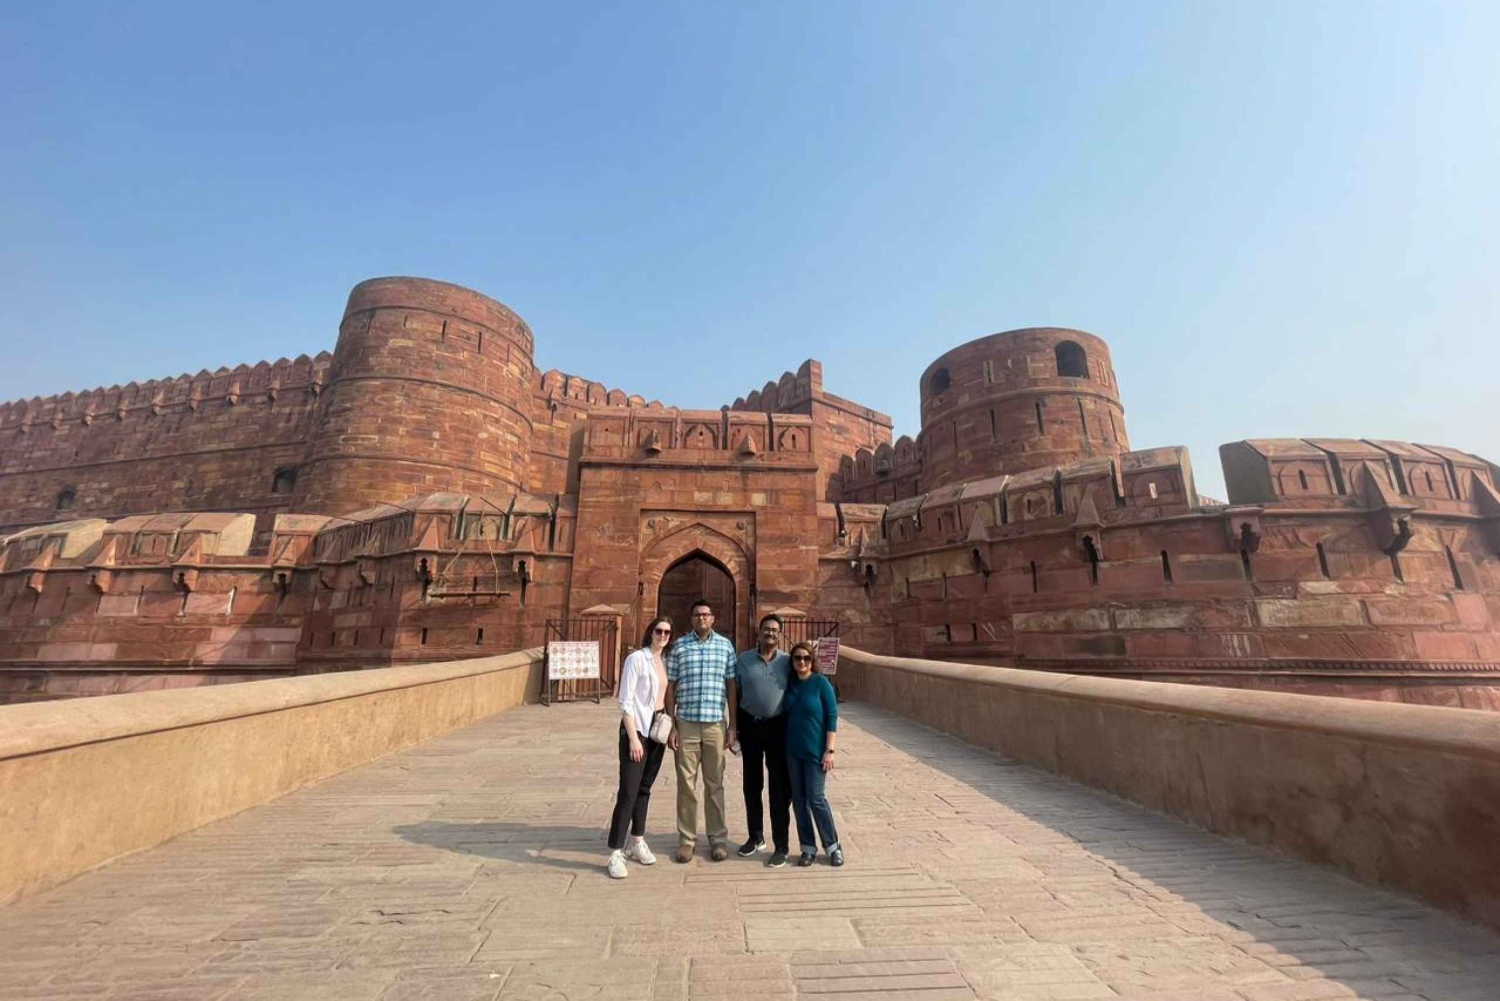 Delhi: Agra Fort and Taj Mahal Day Trip with Tickets & Lunch